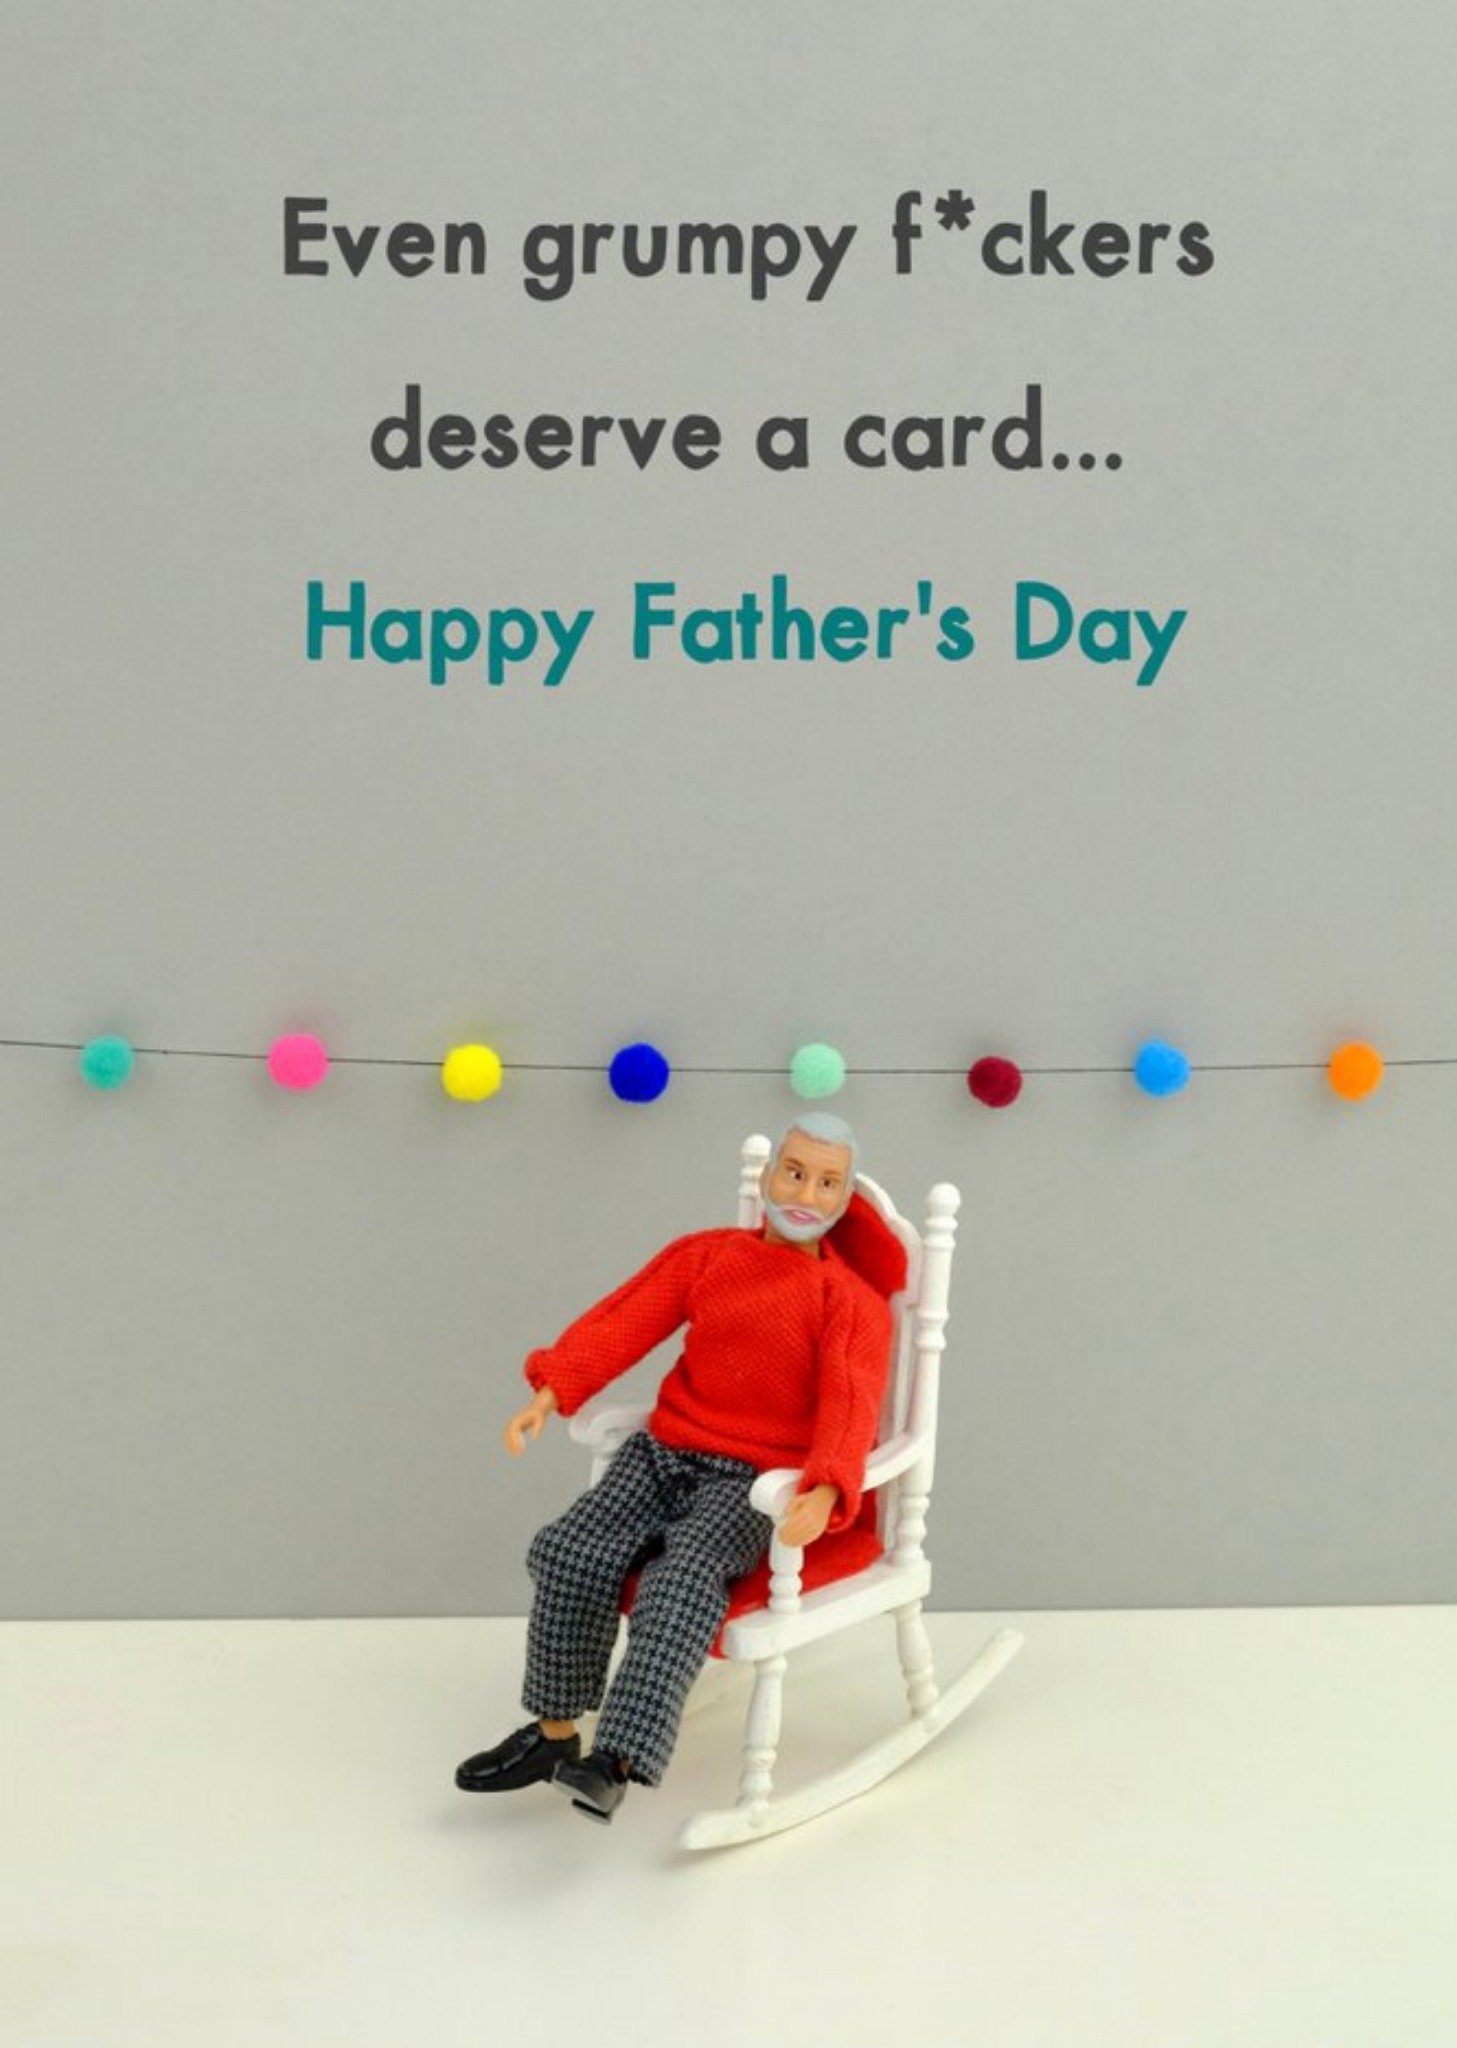 Bold And Bright Funny Rude Even Grumpy Fckers Deserve A Card Fathers Day Ecard